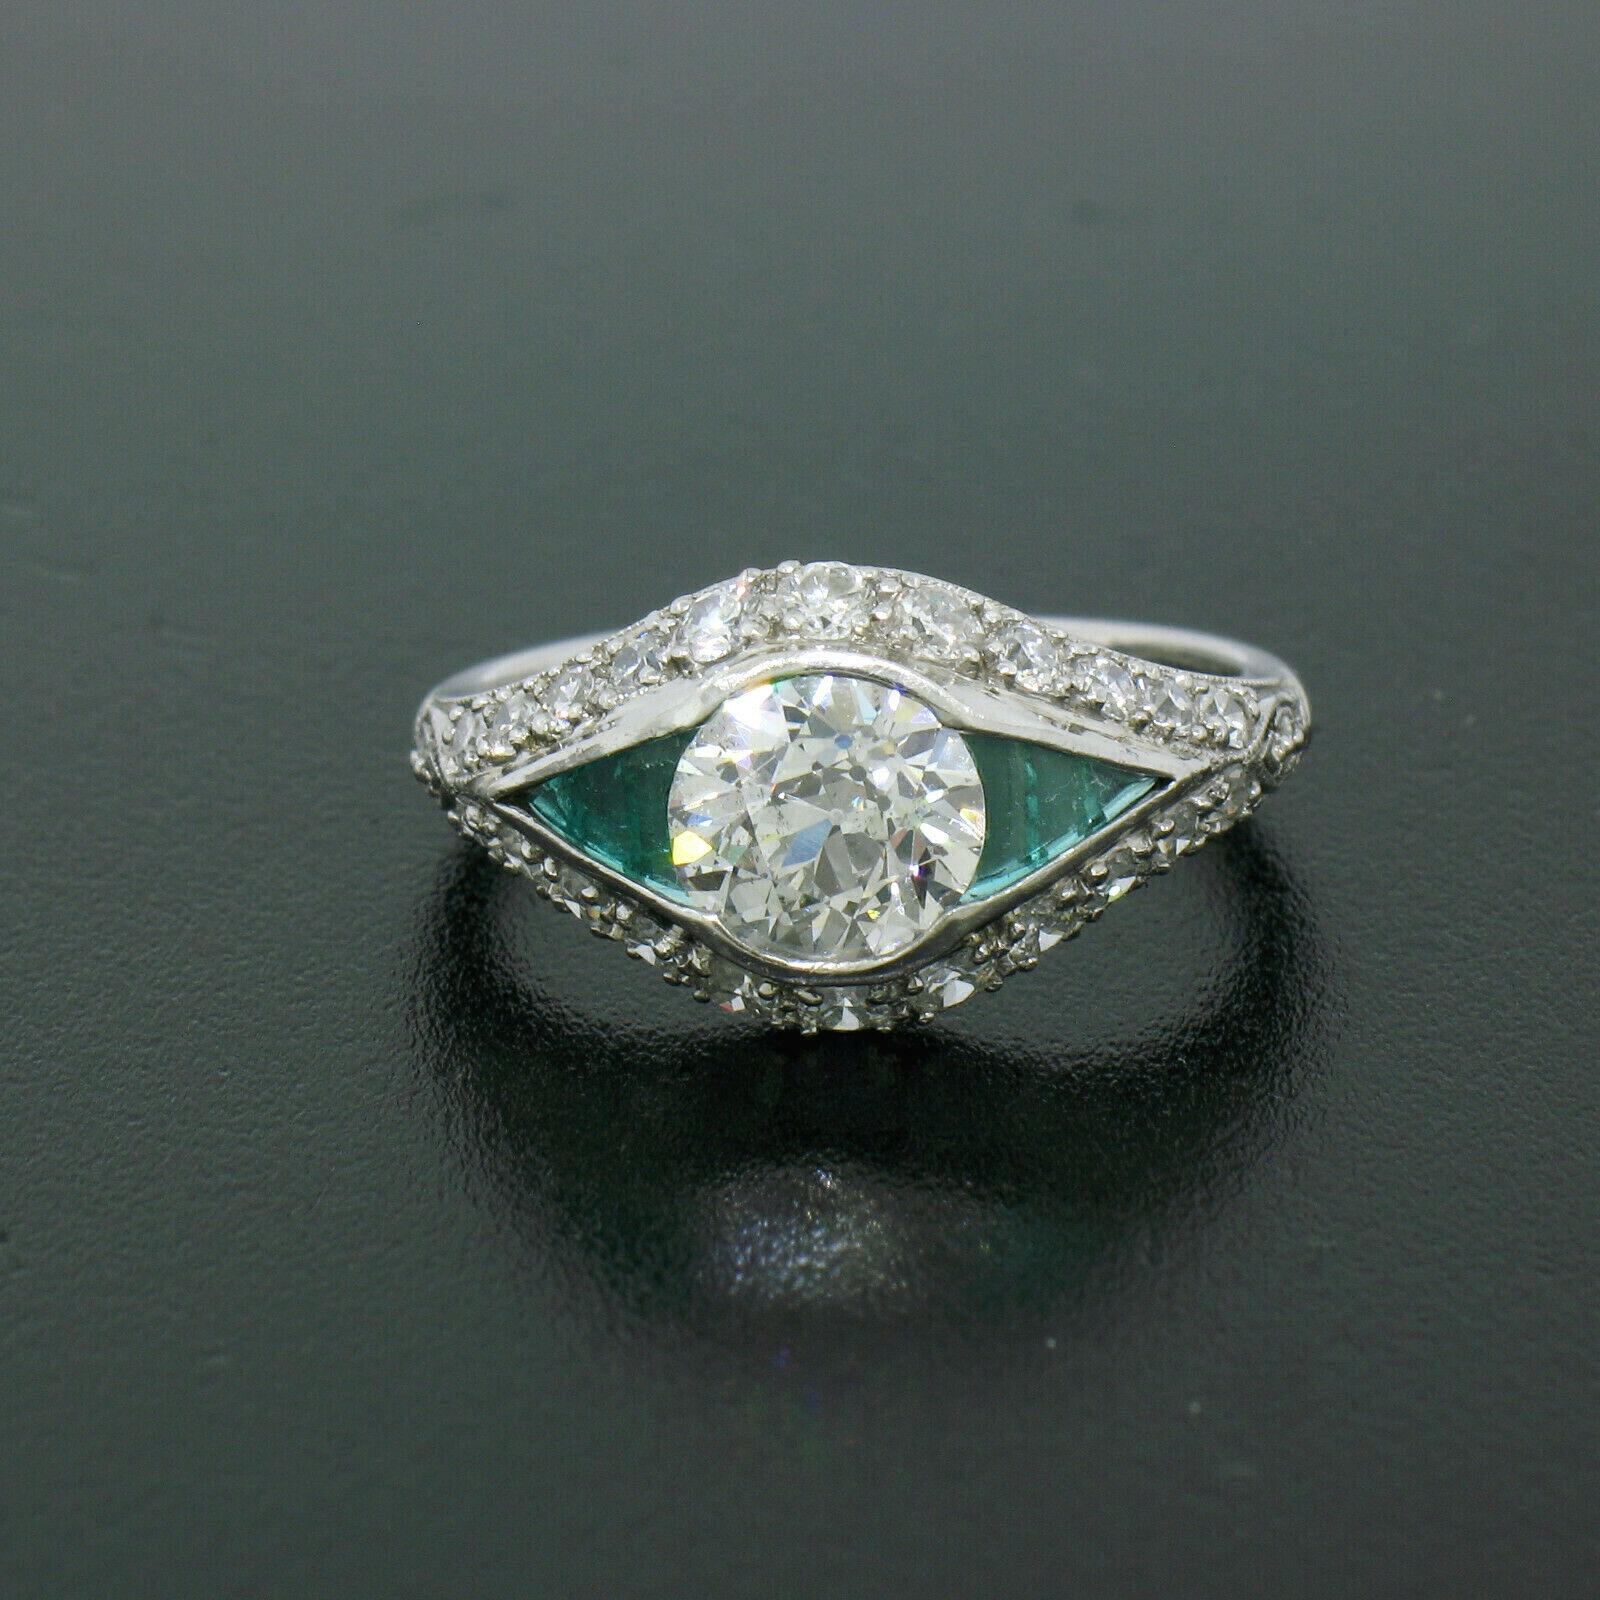 Here we have a very unique diamond and emerald engagement ring crafted in solid .900 platinum during the art deco period. It features a beautiful, VERY FINE QUALITY, old European cut diamond channel set at its center. The diamond has colorless E